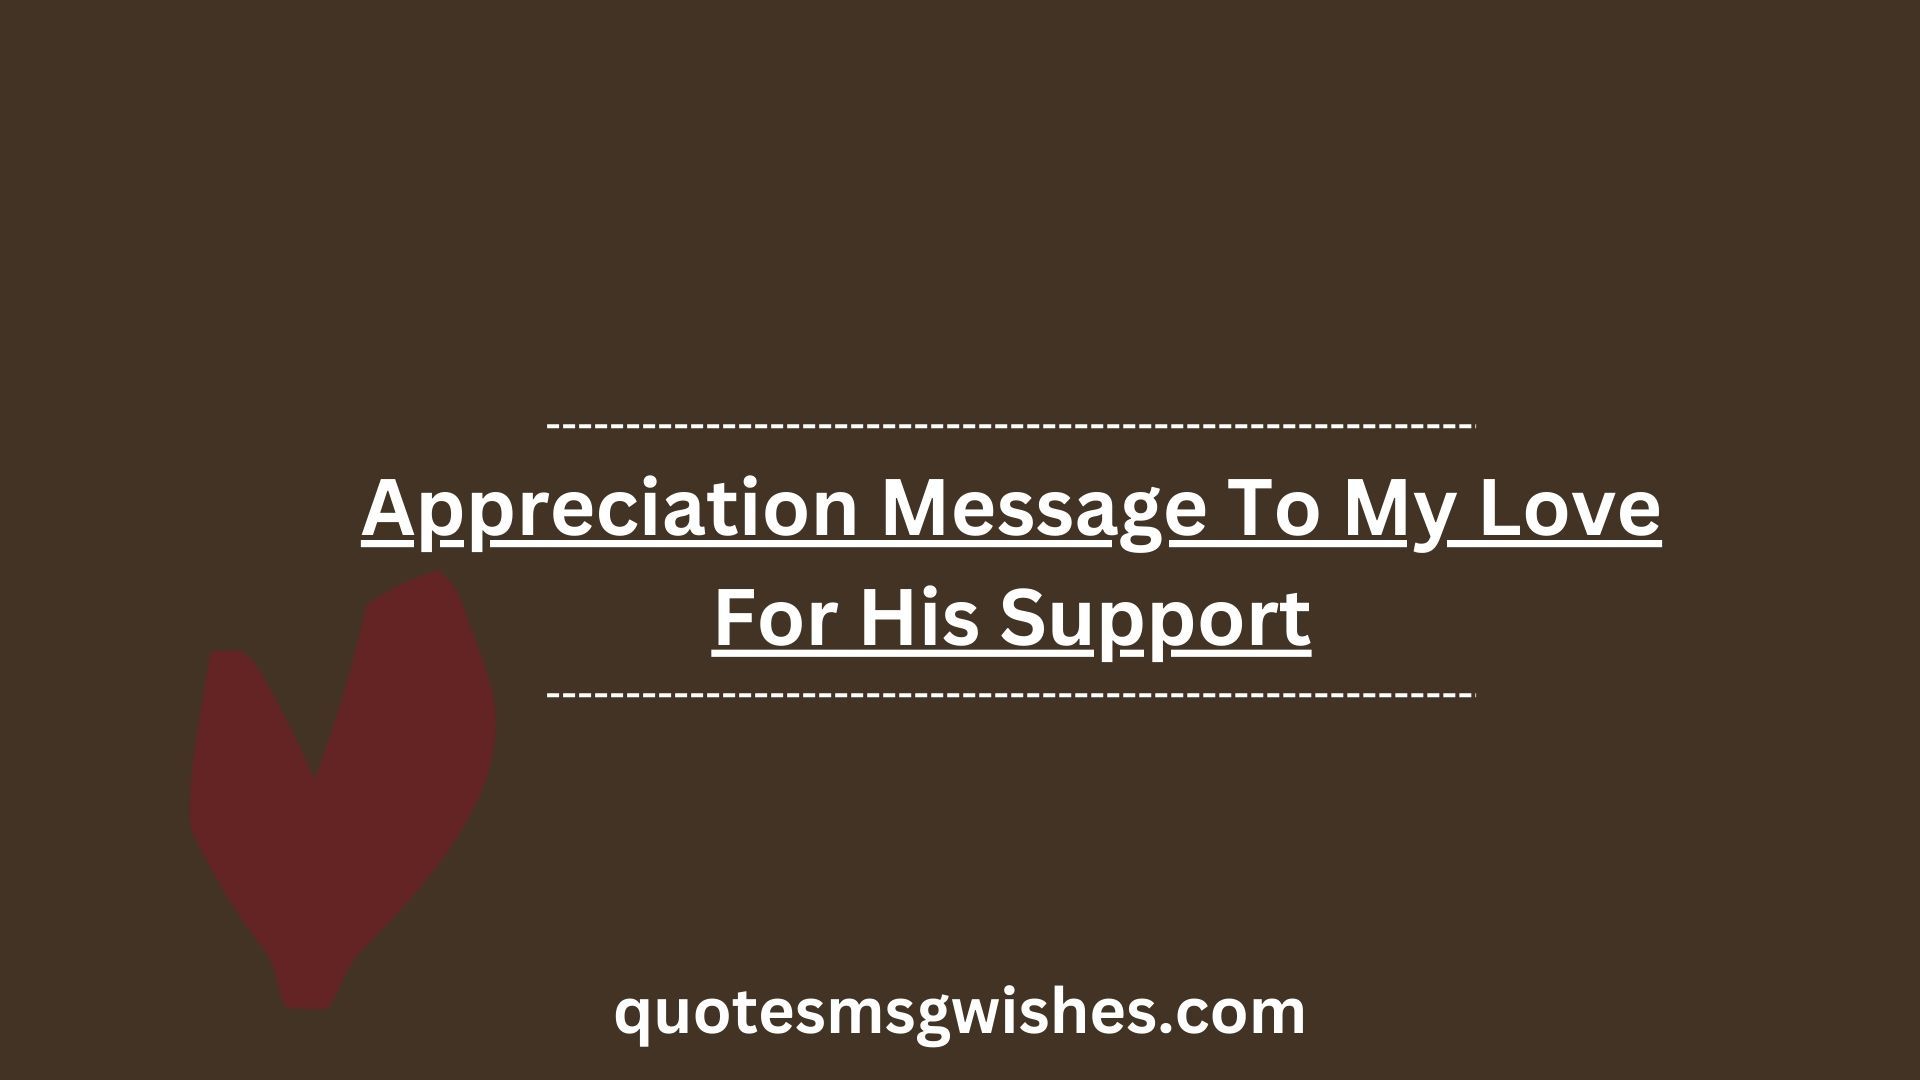 Appreciation Message To My Love For His Support